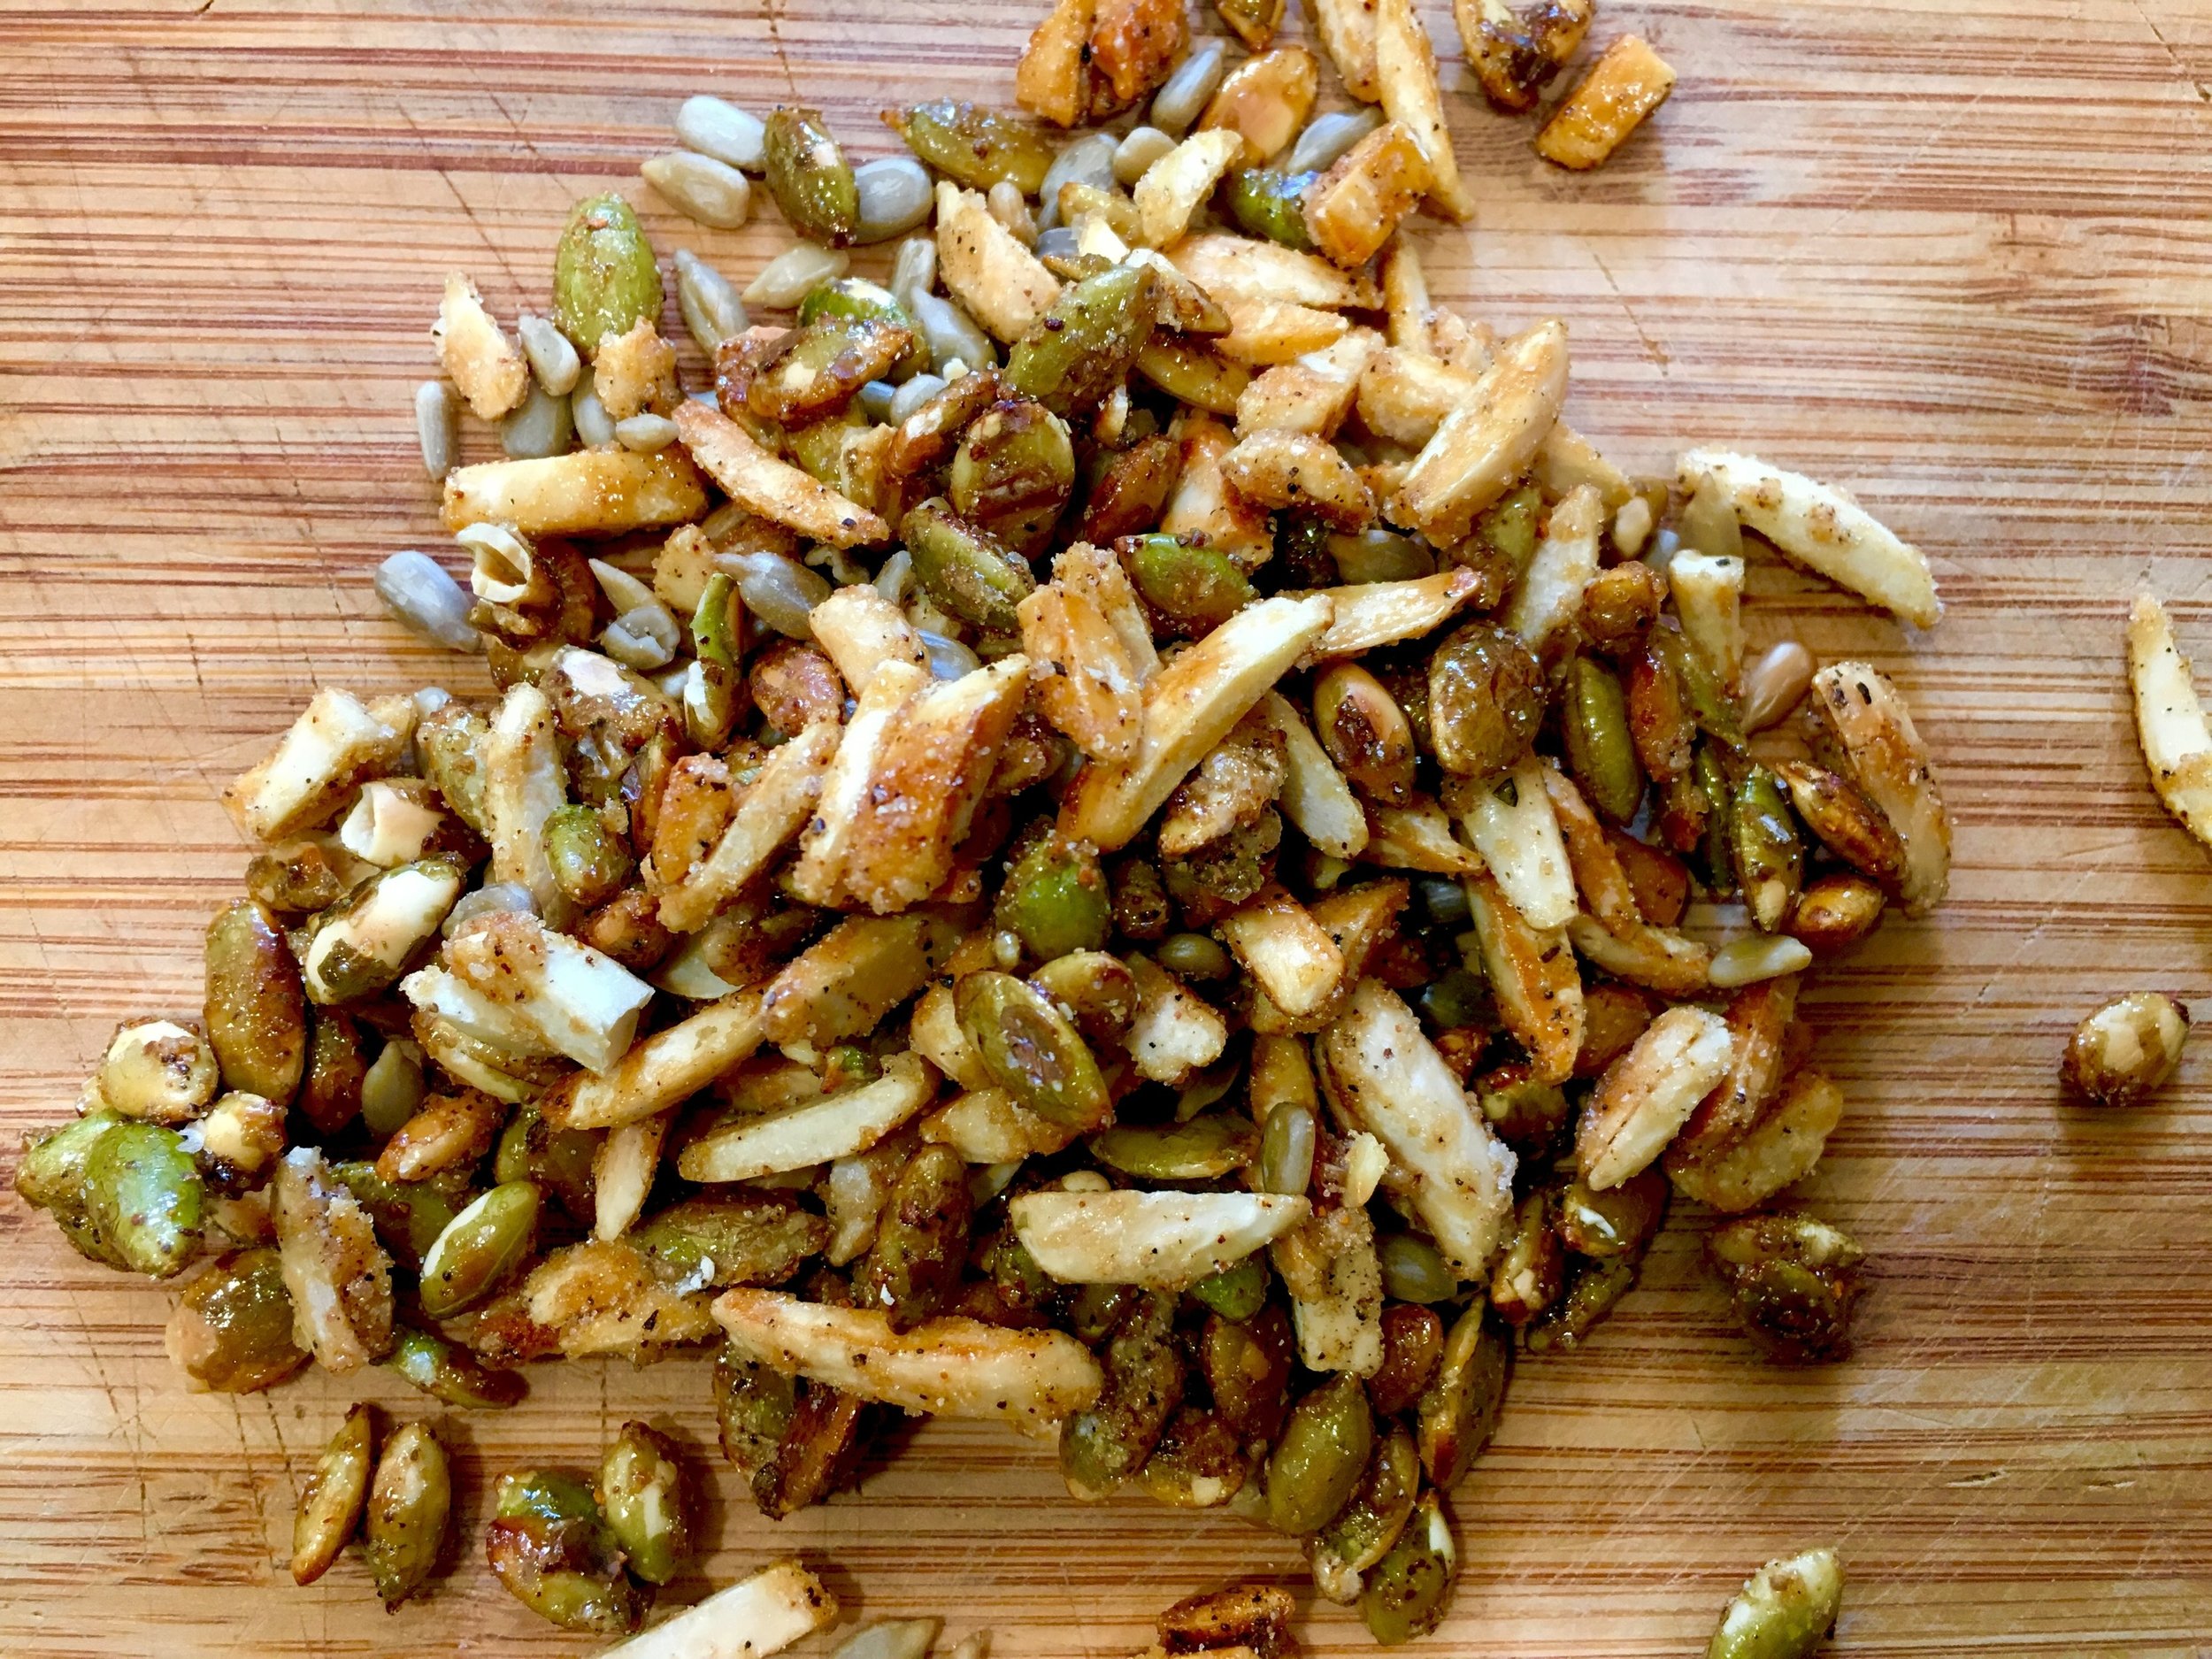 Toasted and Seasoned Nuts and Seeds